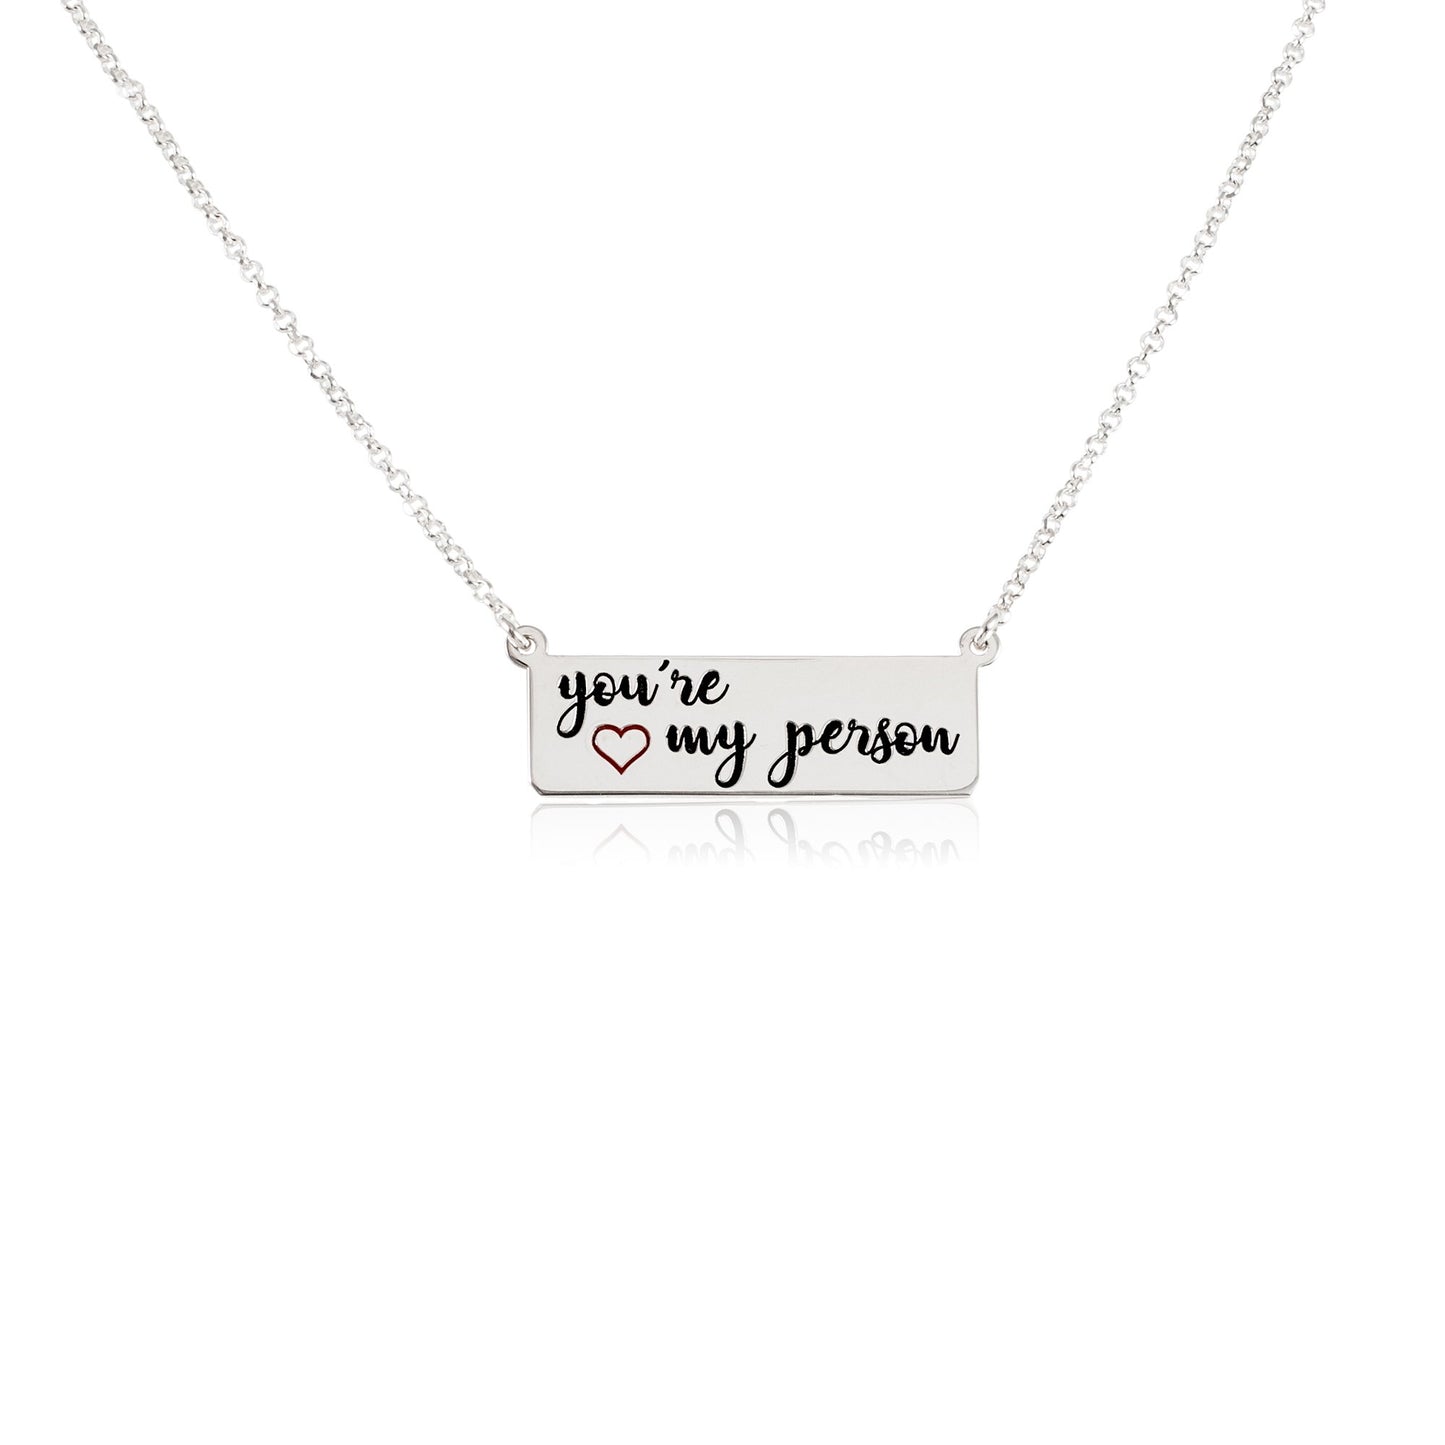 You're my person choker necklace